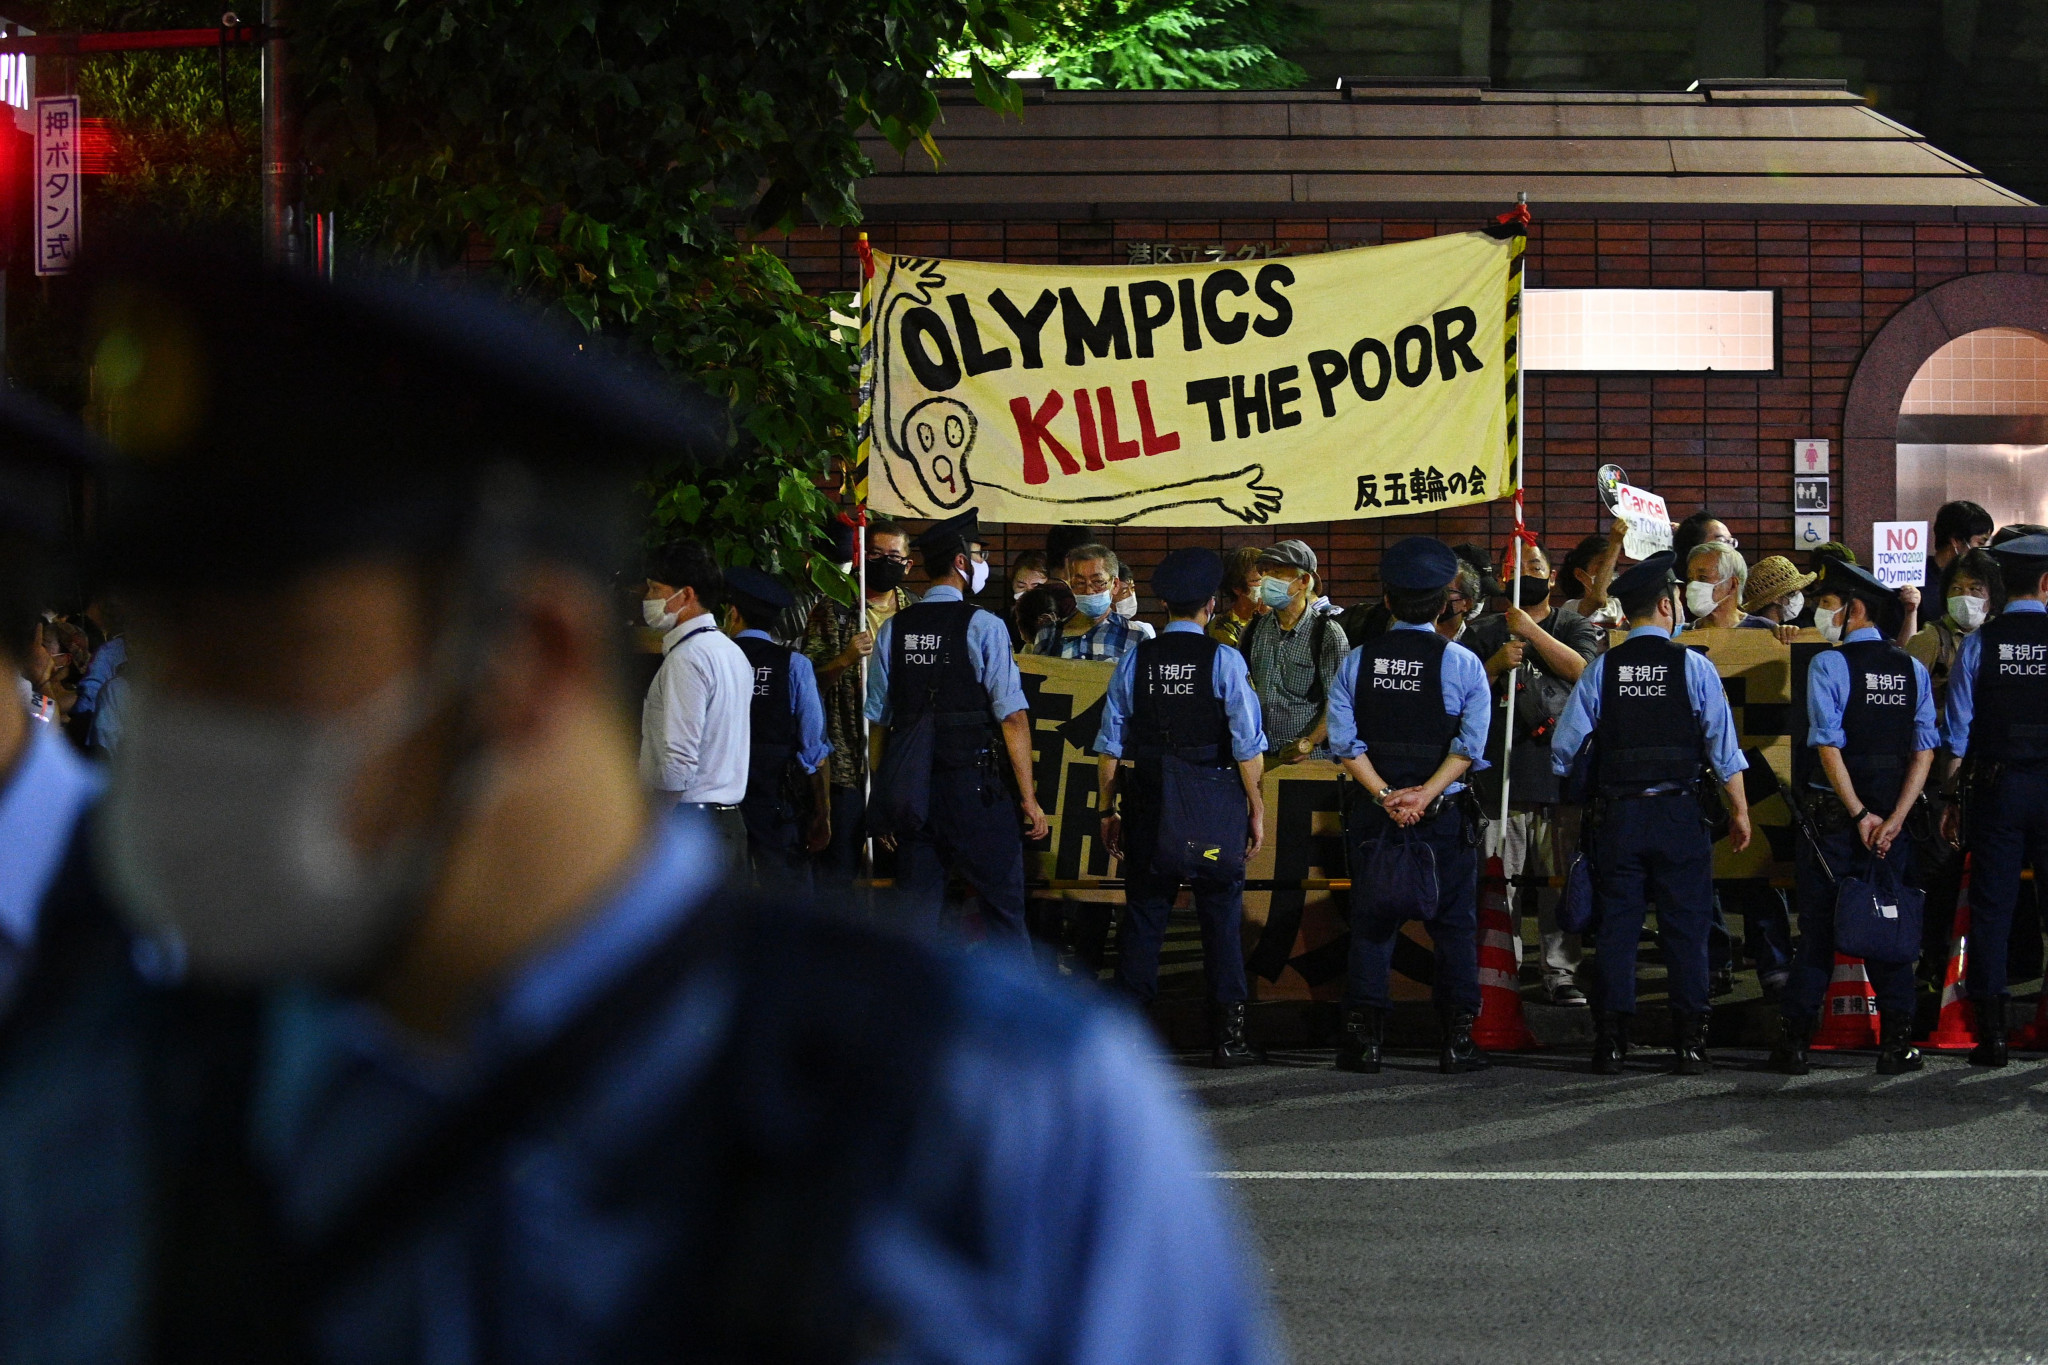 Tokyo 2020 organisers have faced criticism over the staging of the Games as anti-Olympic protesters demonstrated prior to the Closing Ceremony ©Getty Images